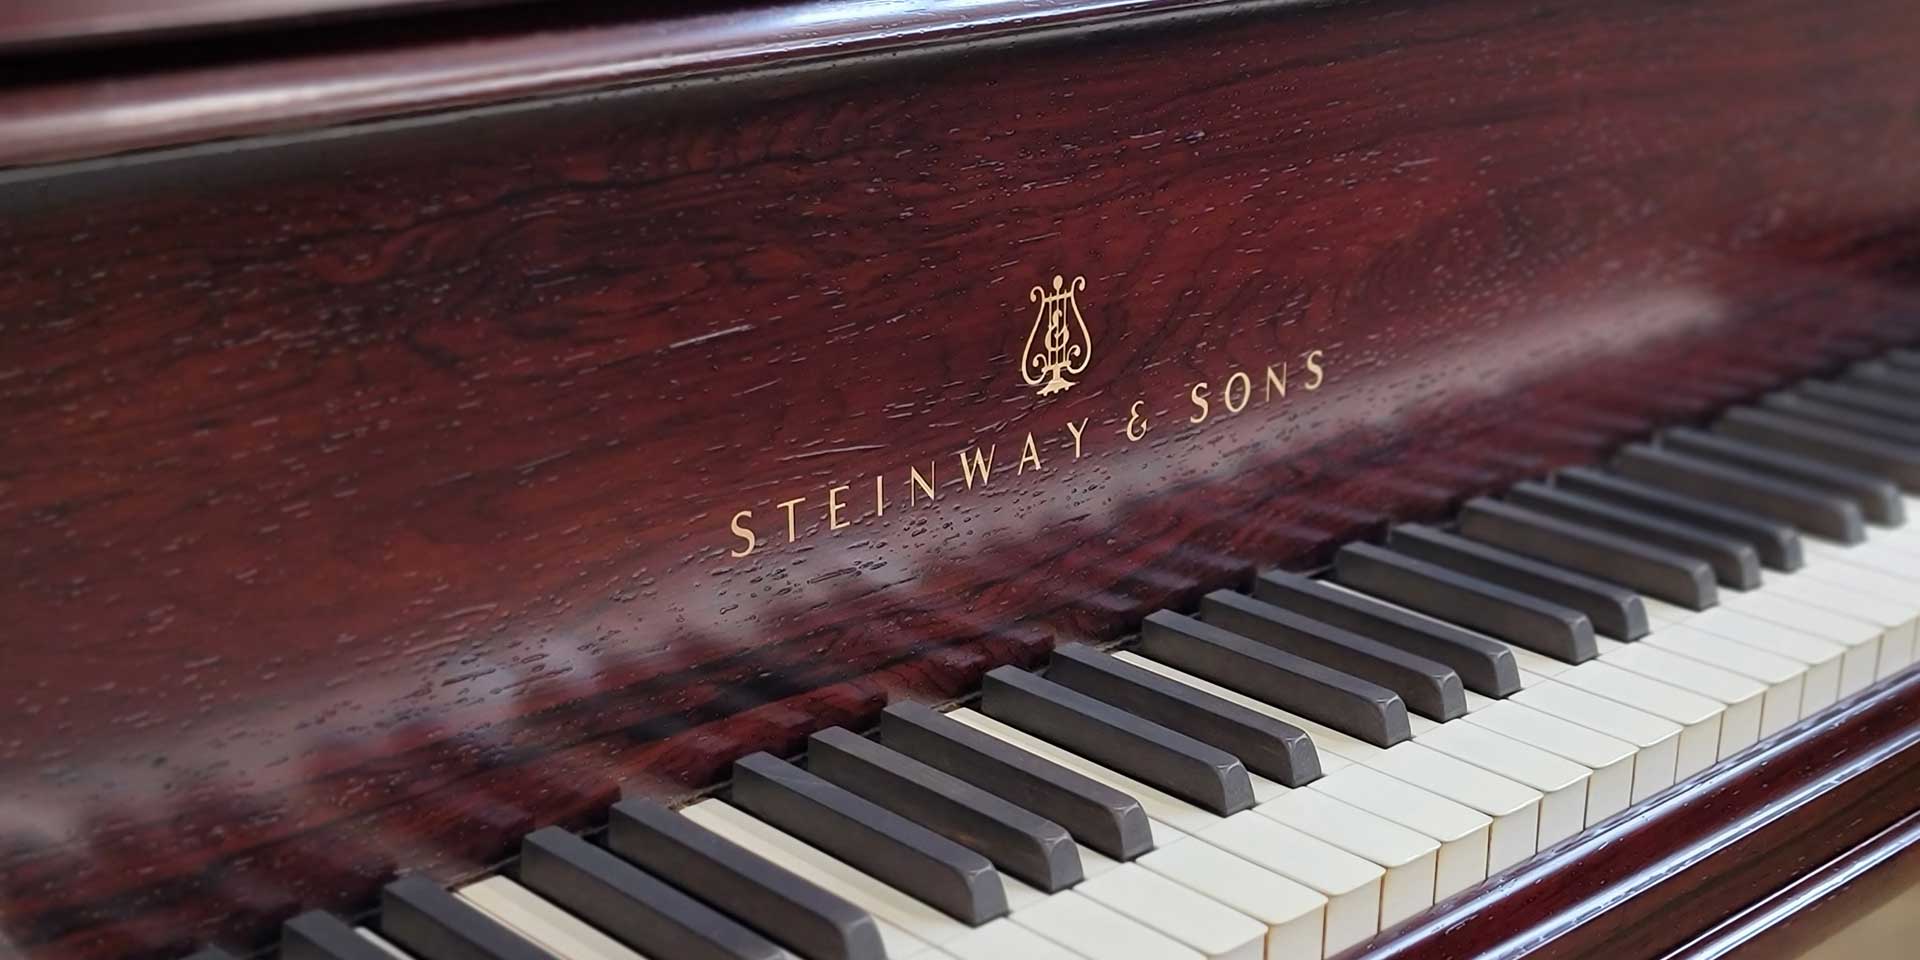 A fully restored 1876 Steinway and Sons Style 3 concert grand piano